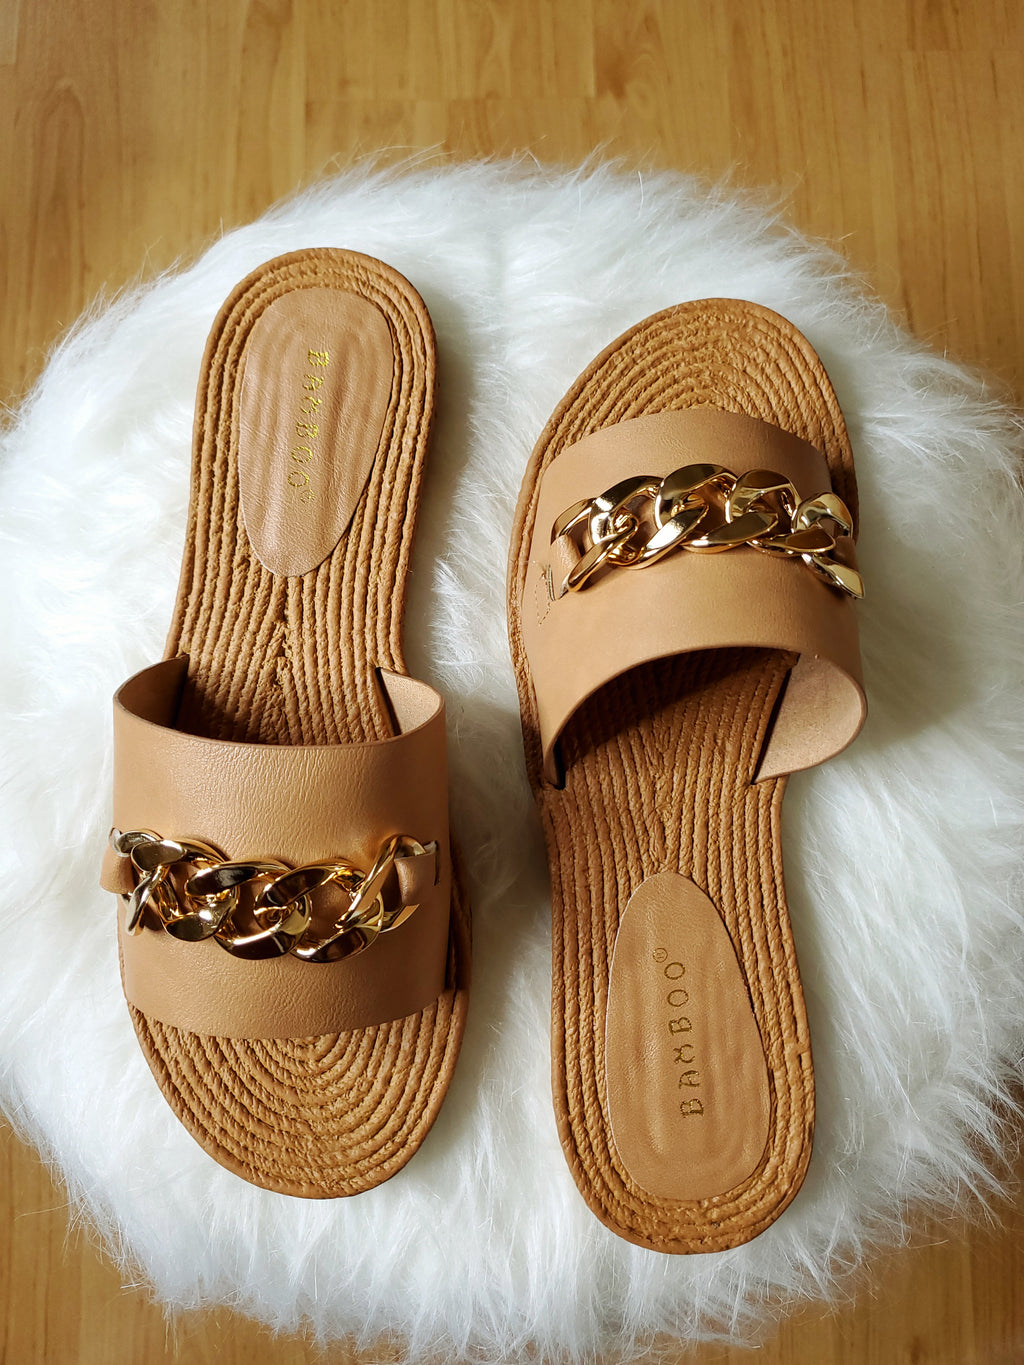 Enhance your wardrobe with these gorgeous sandals. Suitable for any occasion. Running errands, date night, or shopping, vacation, or office.